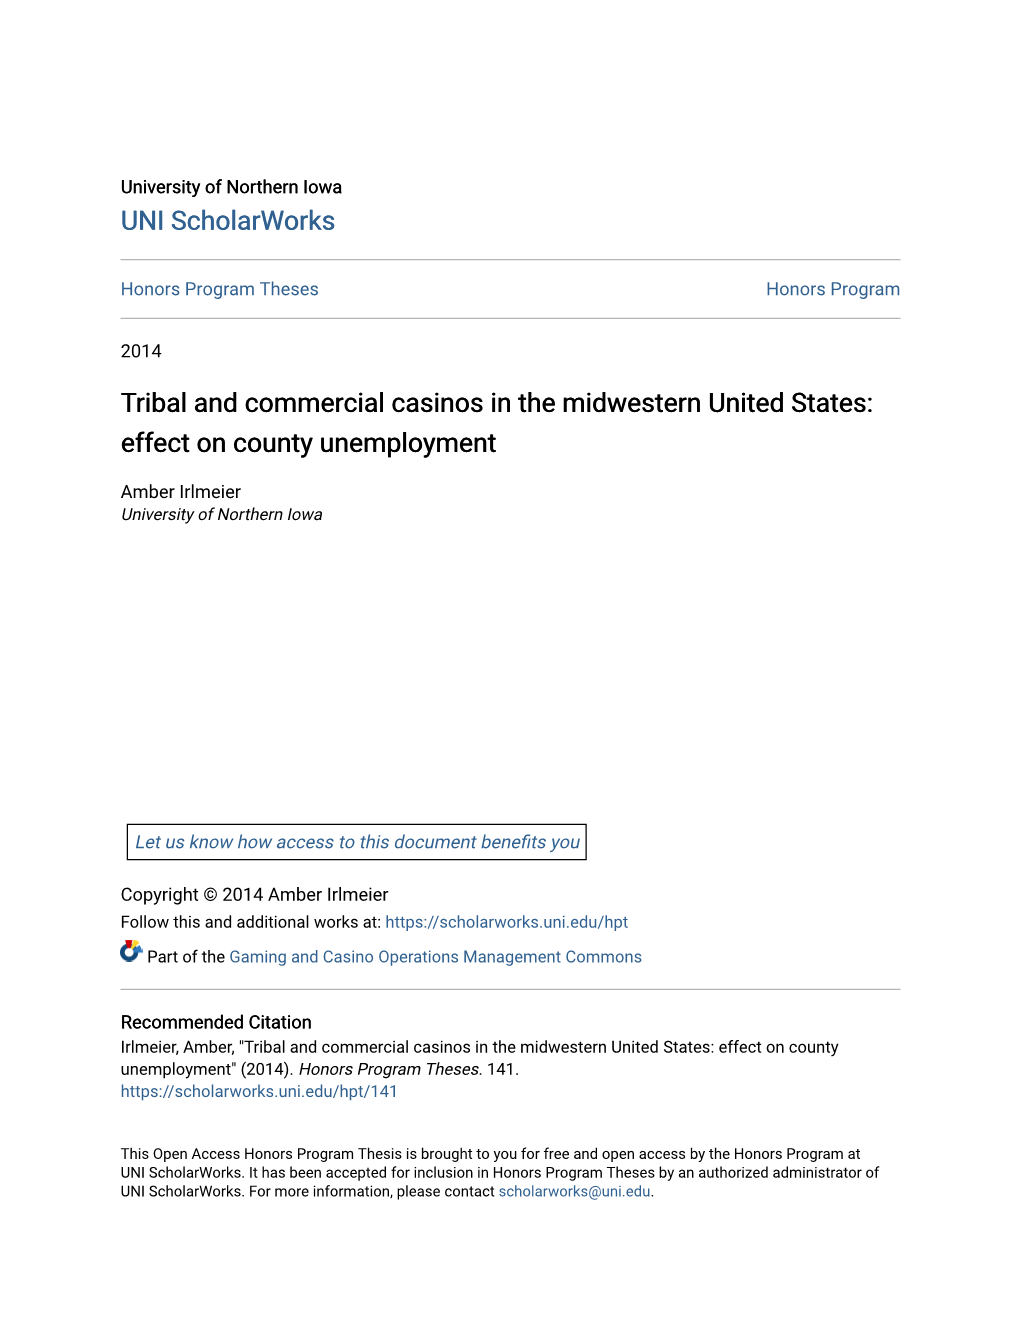 Tribal and Commercial Casinos in the Midwestern United States: Effect on County Unemployment